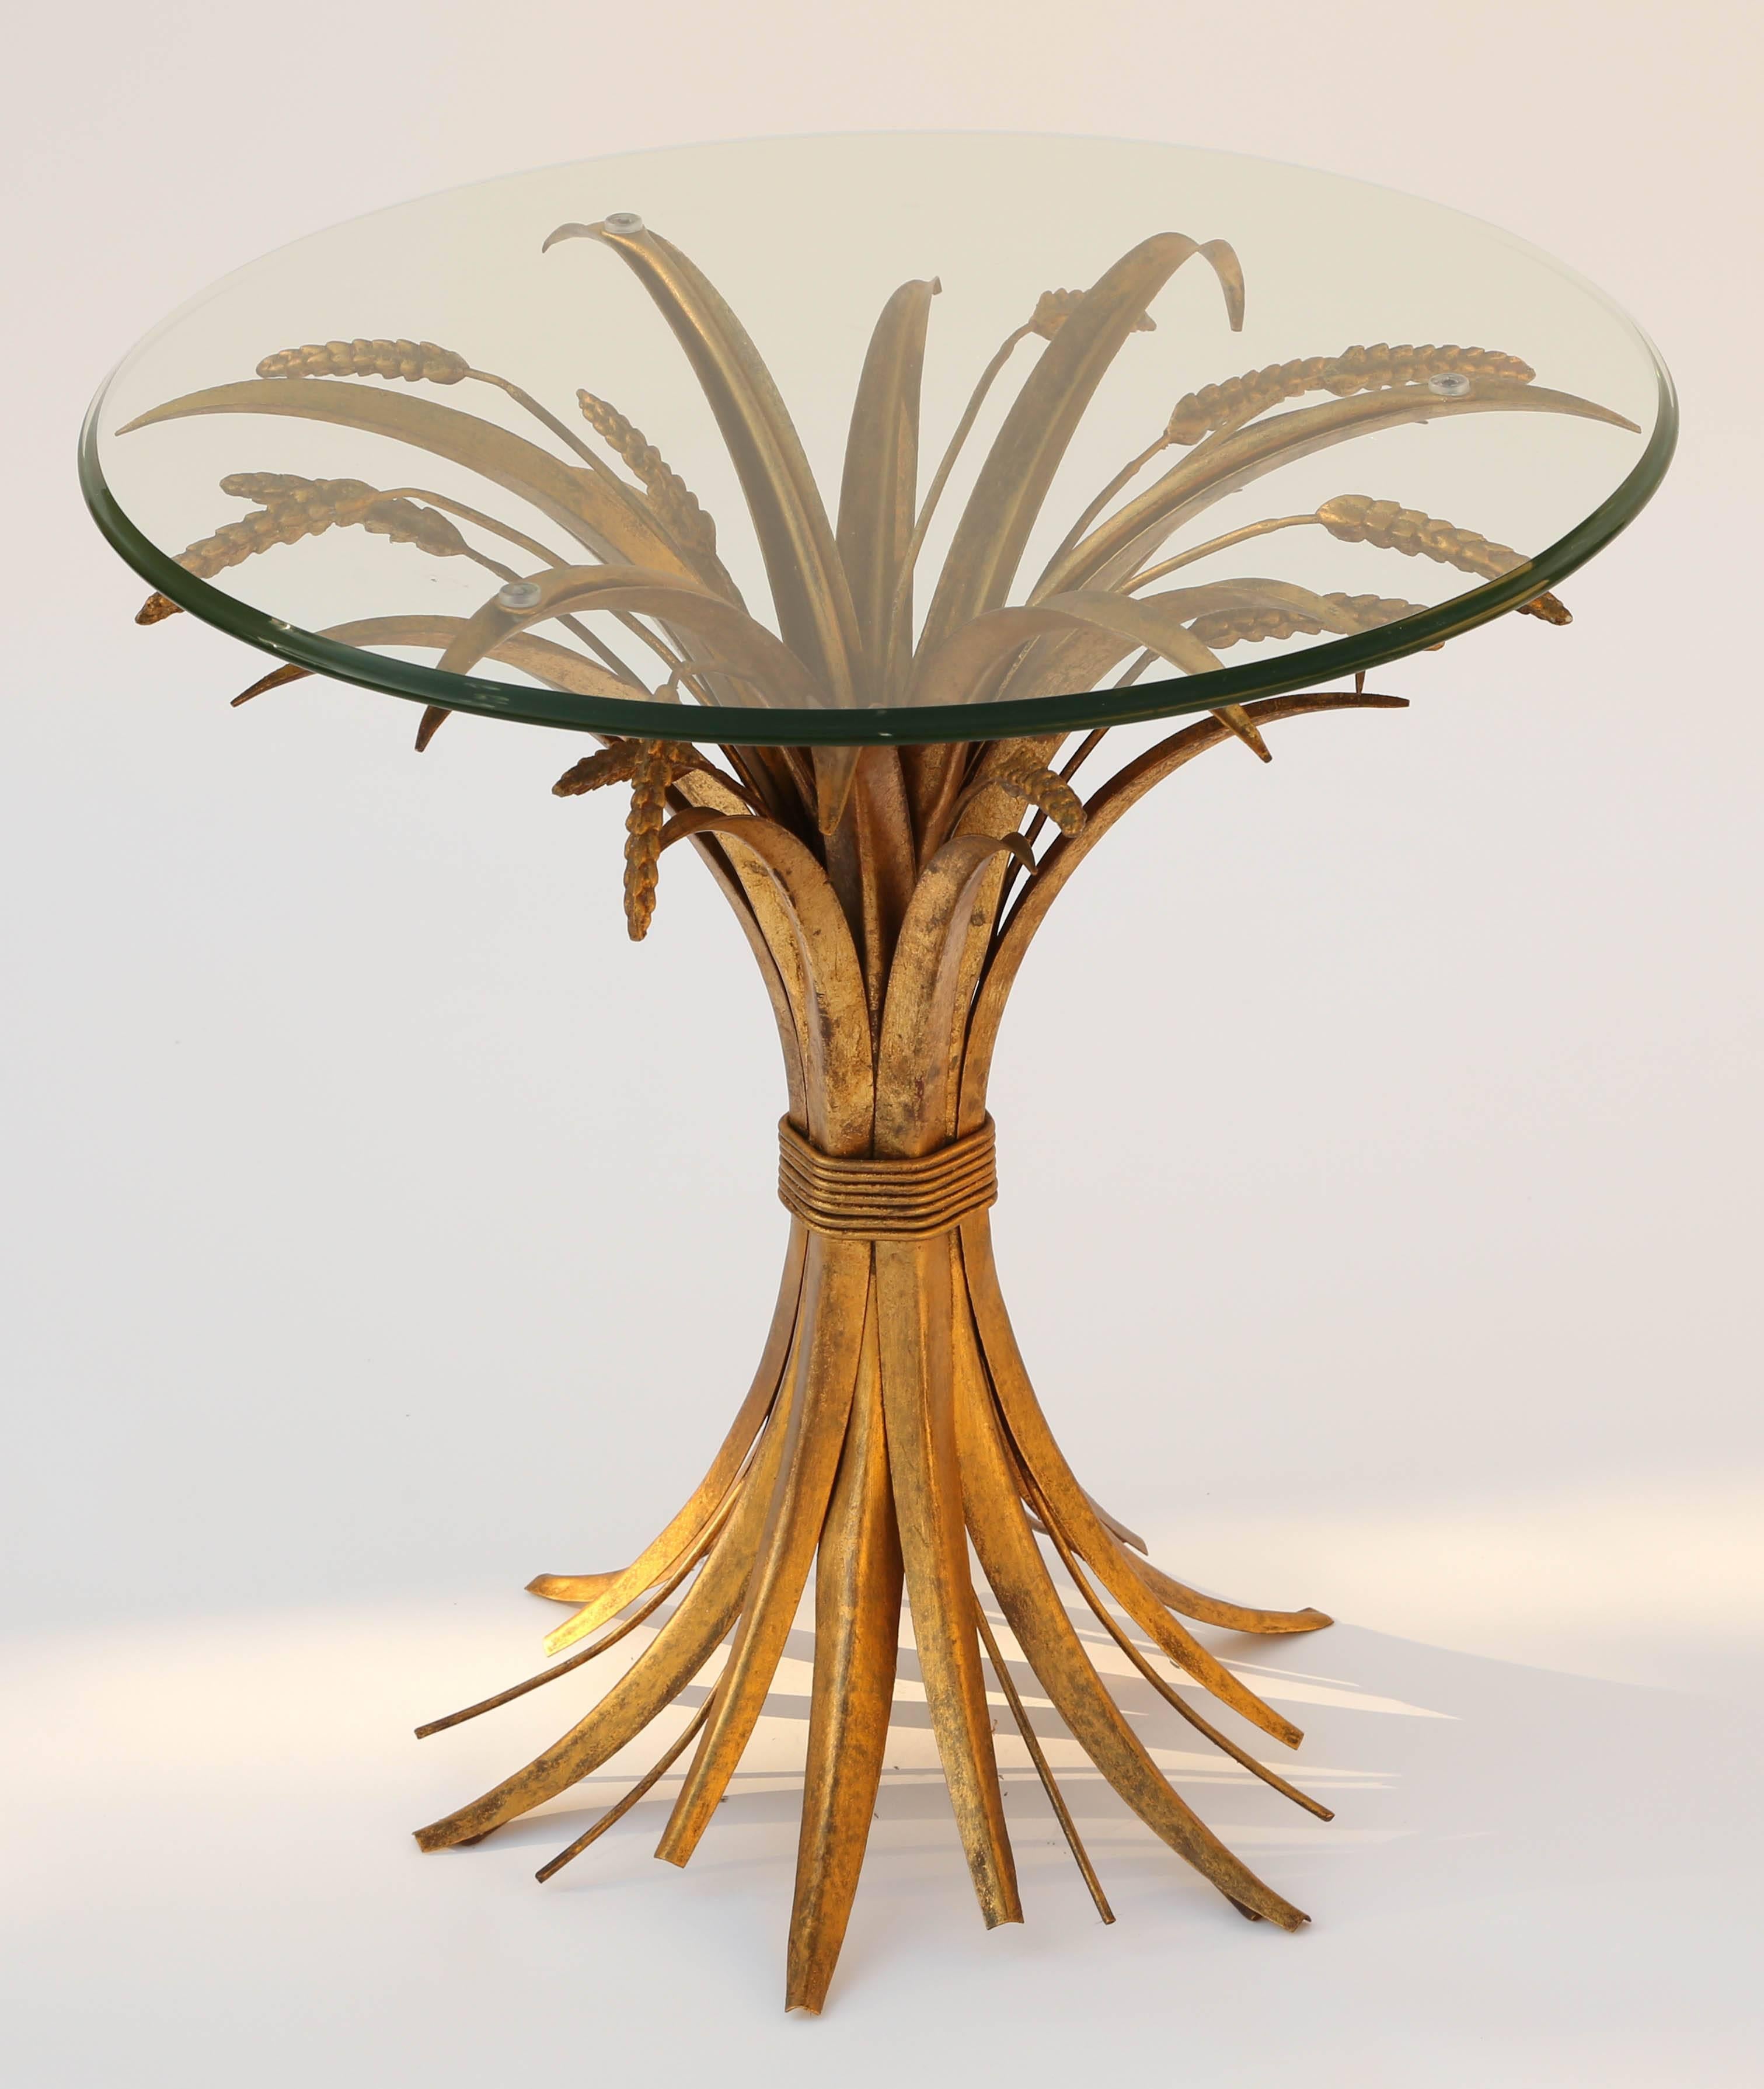 Gilded iron accent table, having a round top of glass, on the "sheaf of wheat" base made famous by Coco Chanel.

Stock ID: D9442